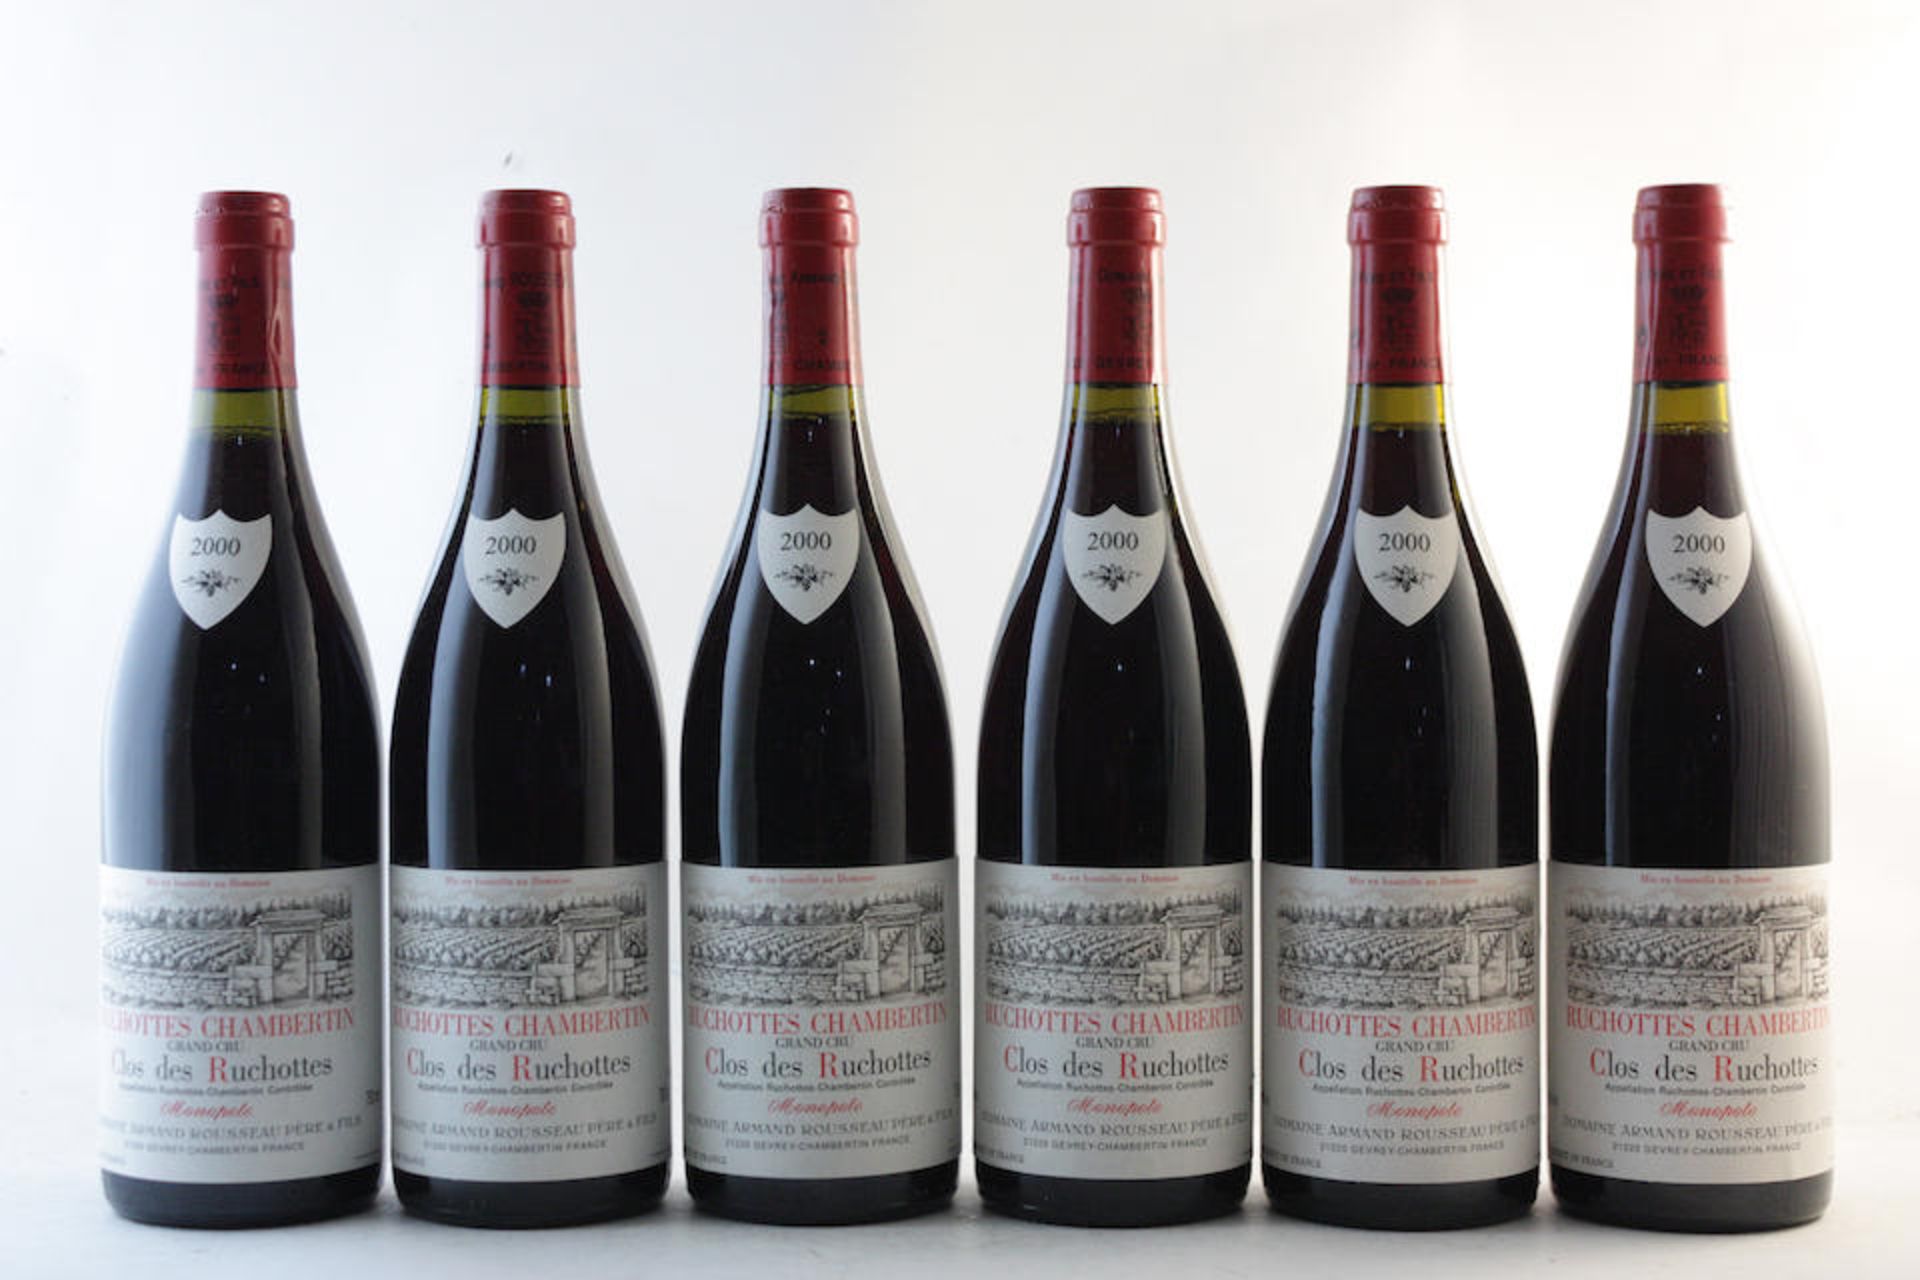 Ruchottes-Chambertin, Clos des Ruchottes 2000, Domaine Armand Rousseau (12) - Image 2 of 3